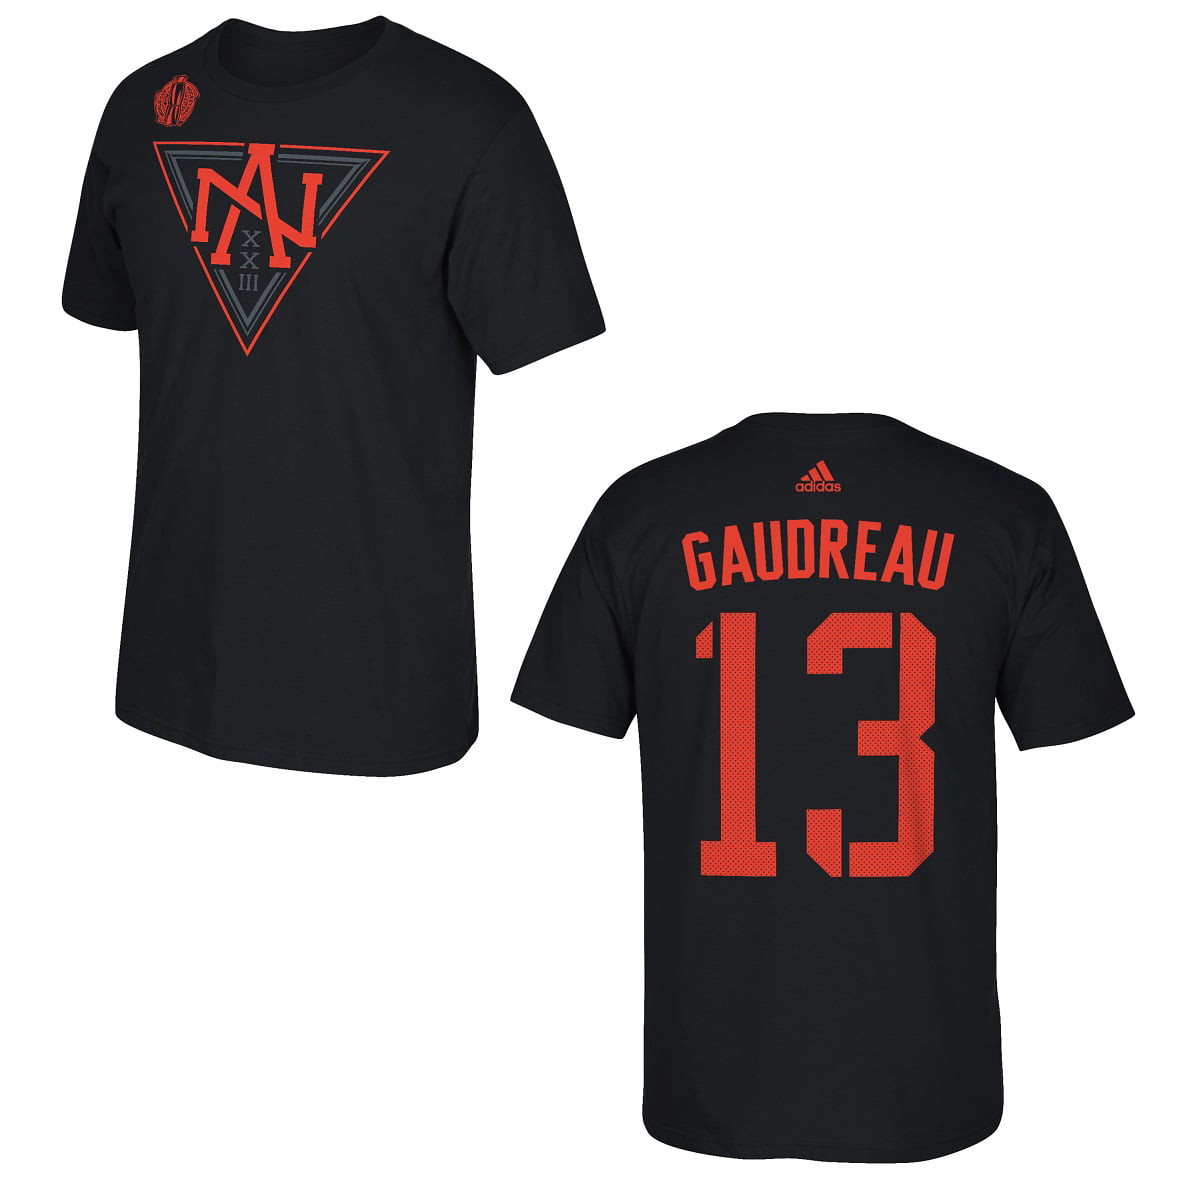 johnny gaudreau world cup jersey